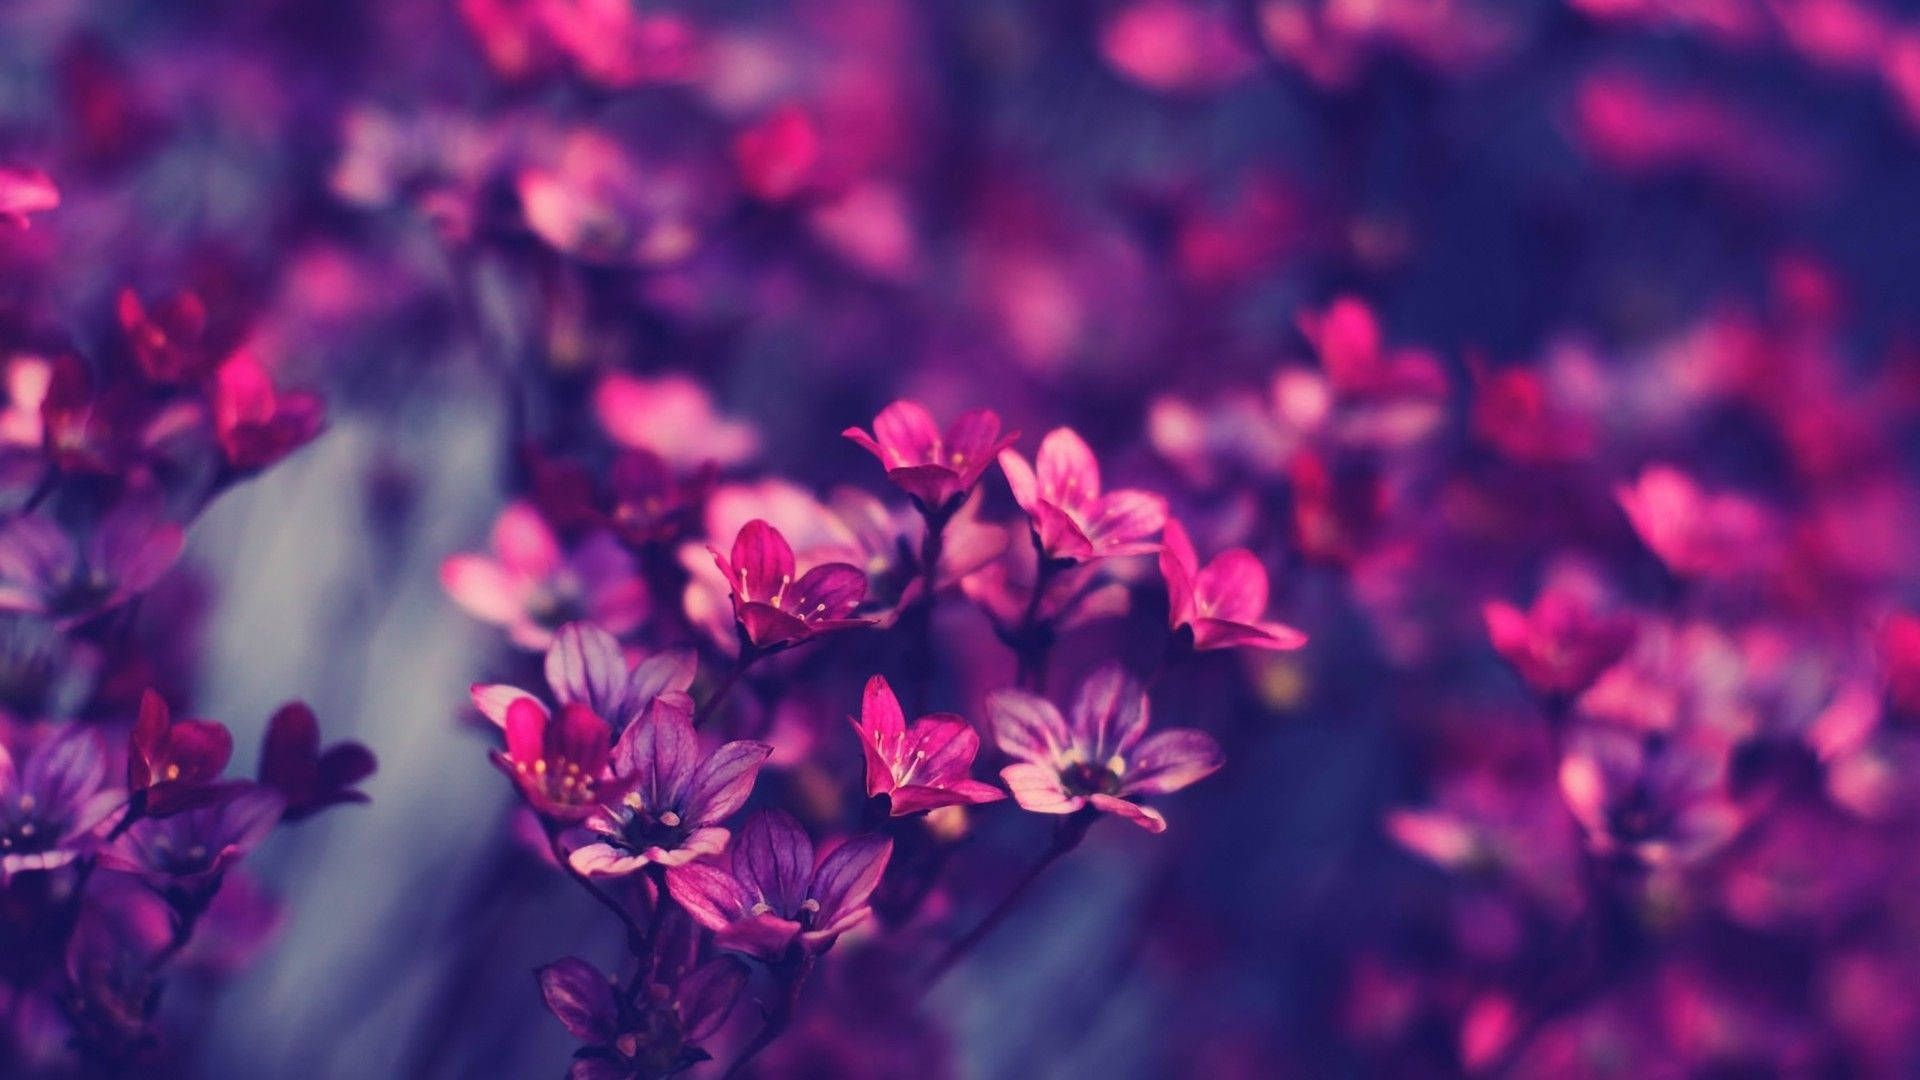 Download 1920x1080 wallpaper flowers, purple, the leaves, the dark background, blur, macro photography, bright, spring, summer, nature, flora, the dark, background, flowers, spring, summer, nature, flora, the dark - 1920x1080